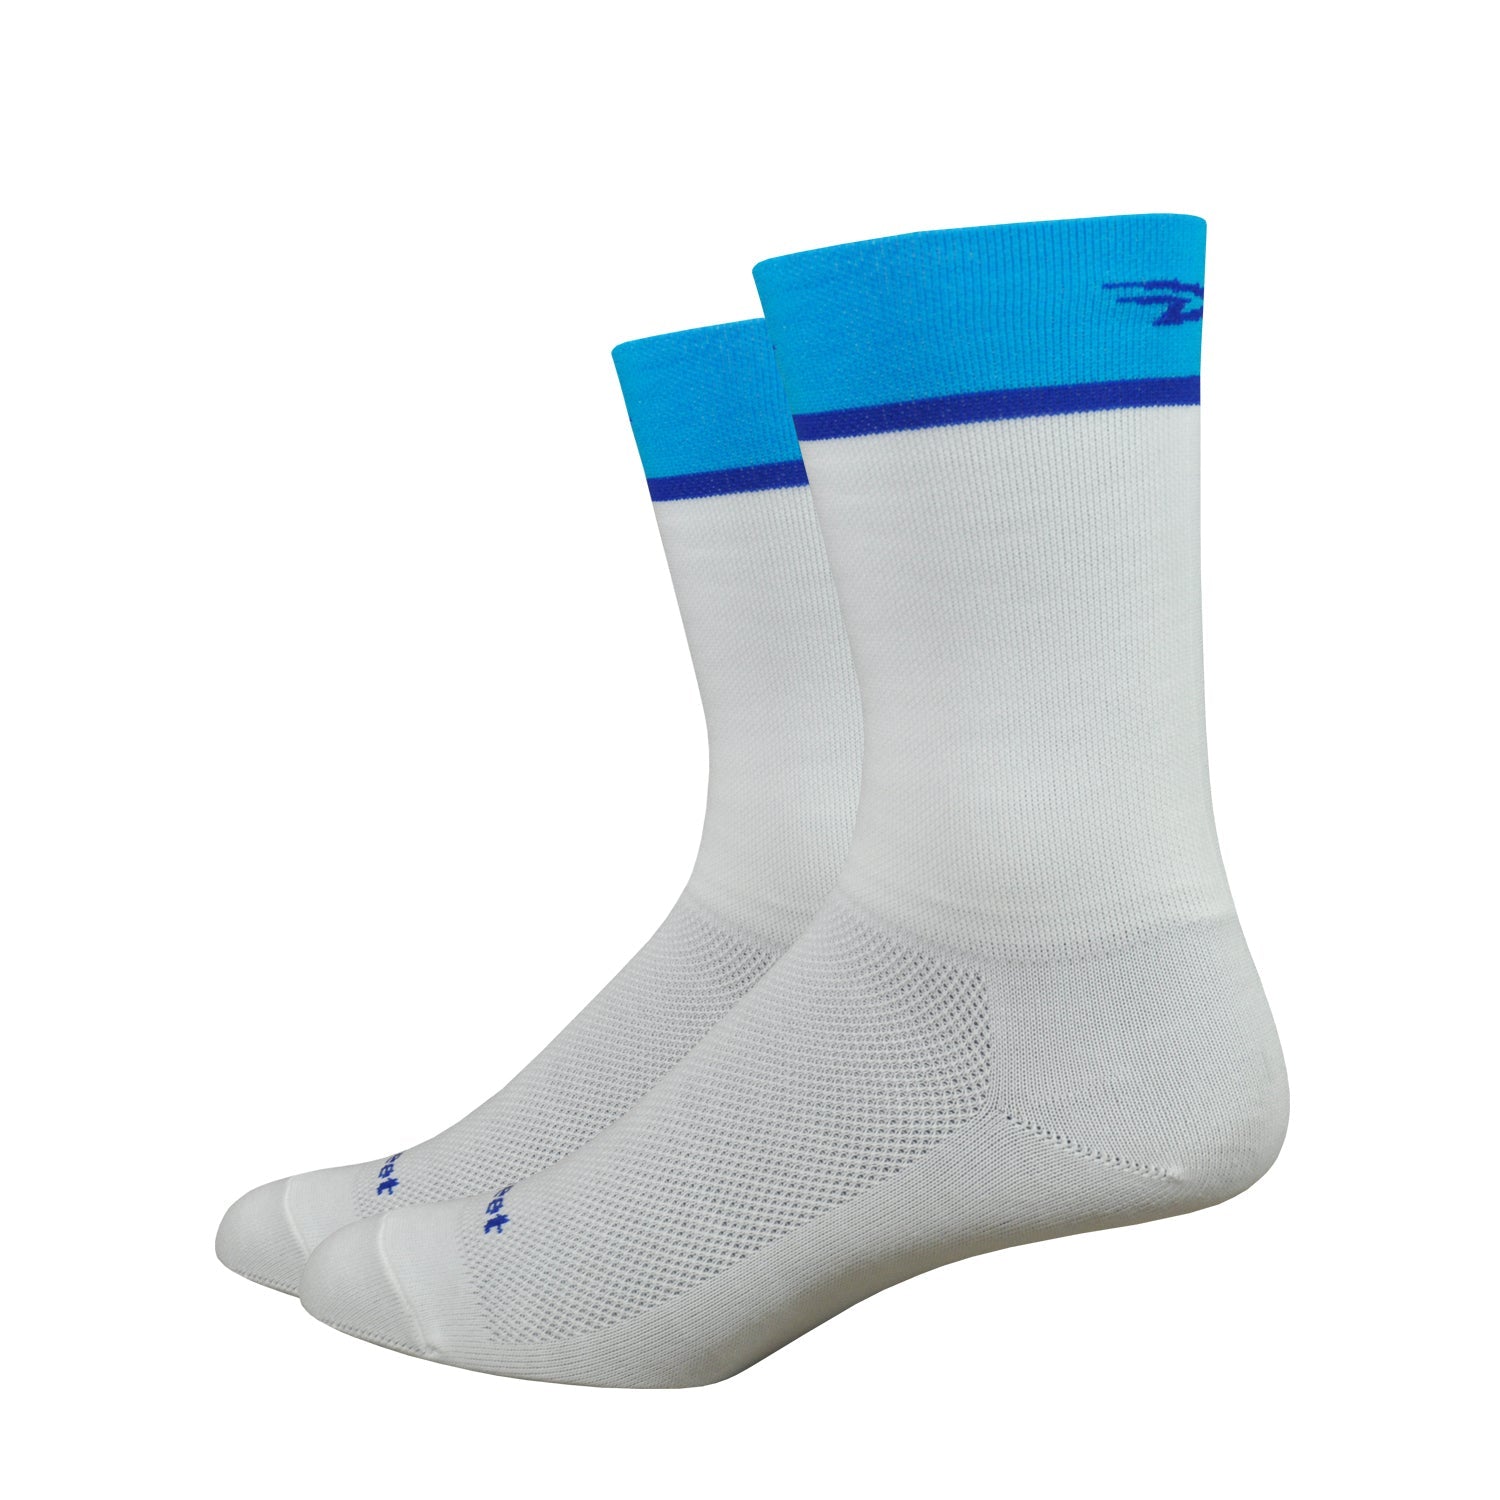 DeFeet Aireator Blue Striped Crew Cycling Socks